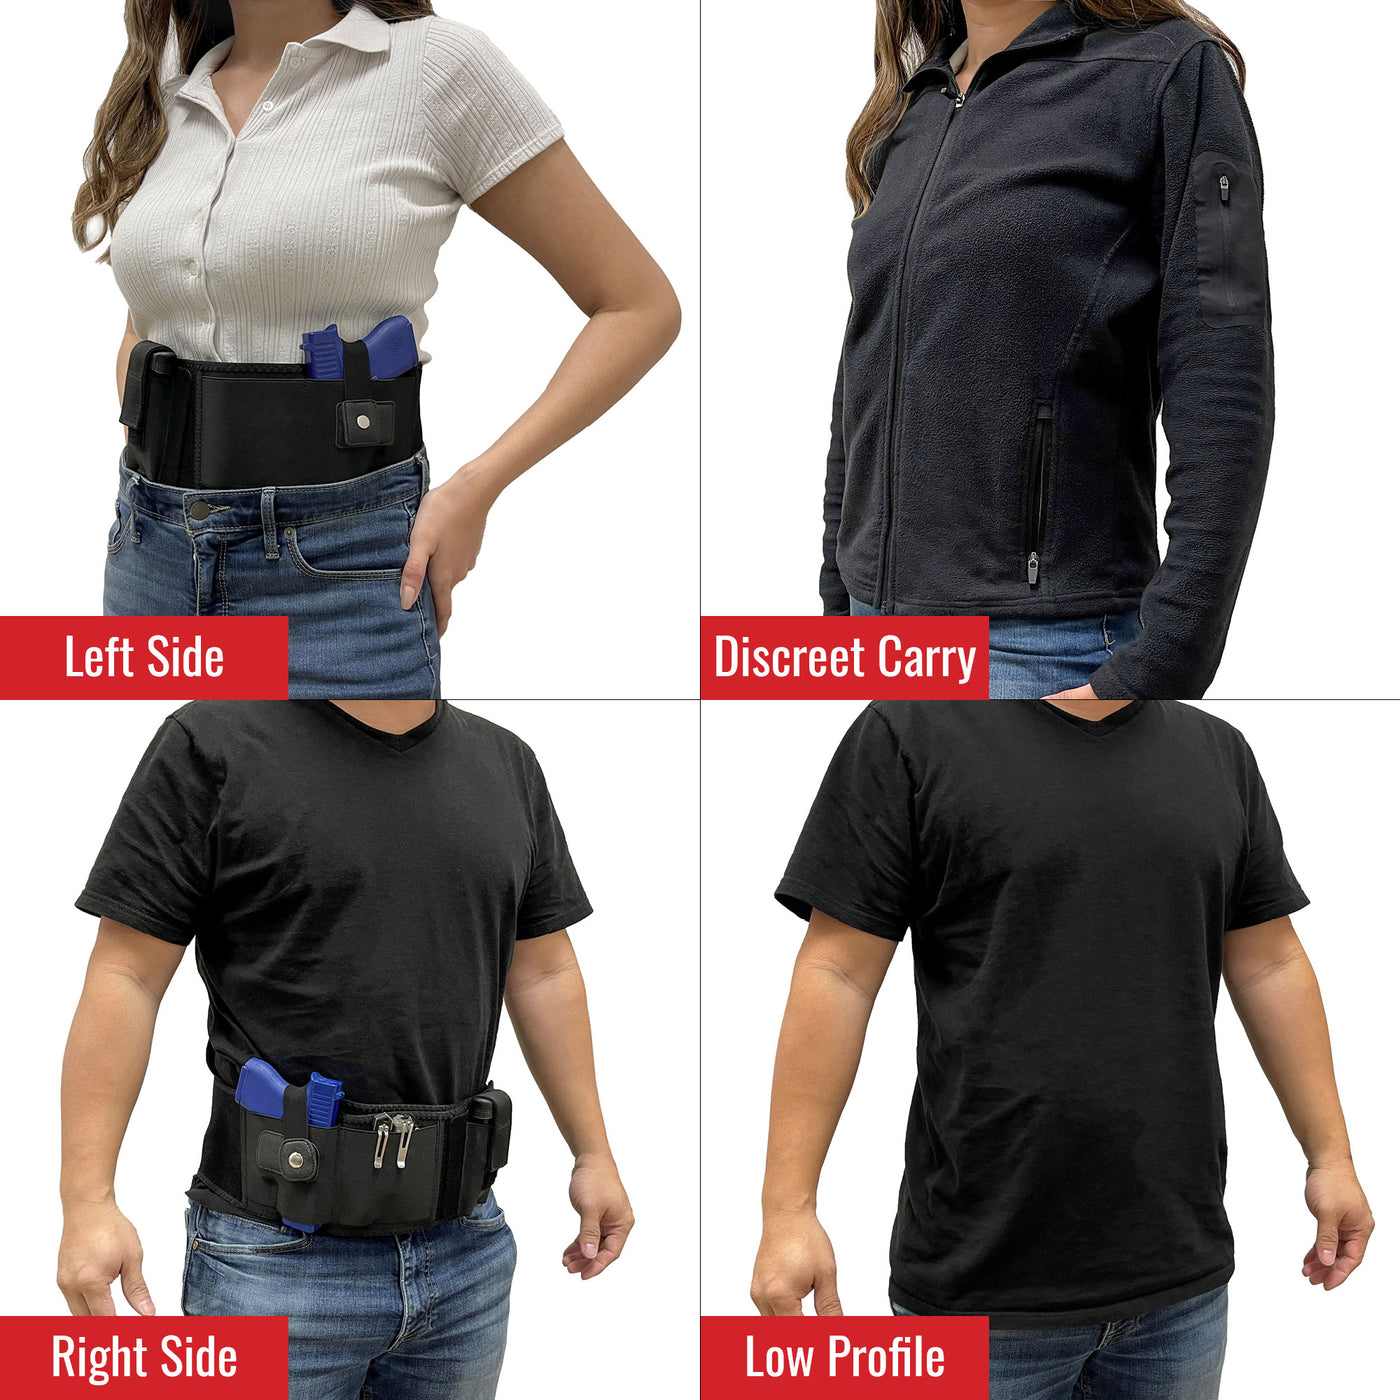 Unisex Belly Band for Concealed Carry – JessieJames Handbags